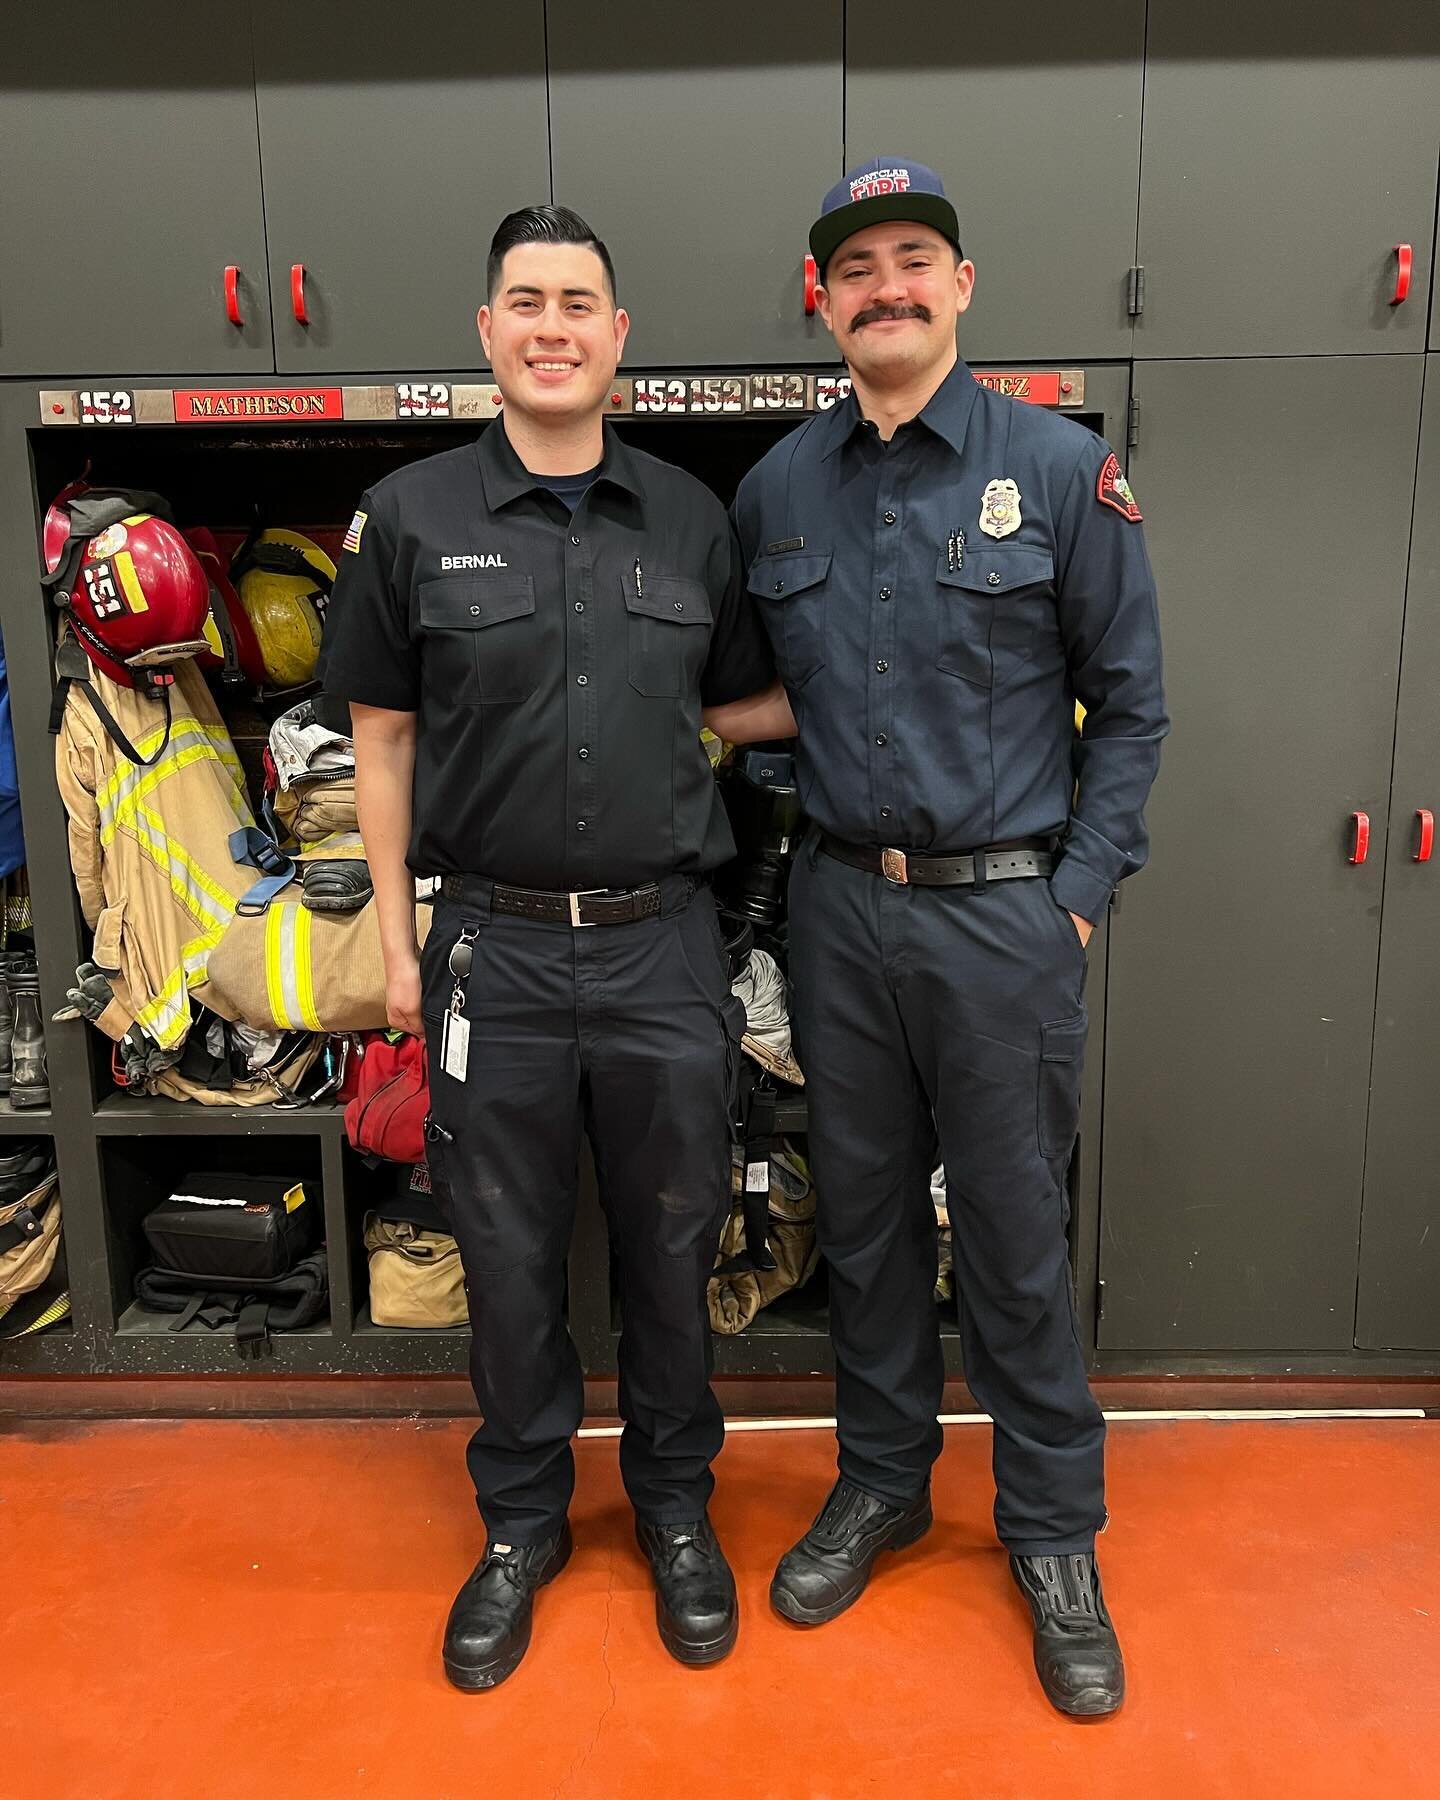 Please join us in congratulating Paramedic Intern Xavier Bernal in completing his field internship here at the Montclair Fire Department! Xavier successfully completed the required 480 hours alongside Fire Engineer/Paramedic Joseph Metzo. We are happ